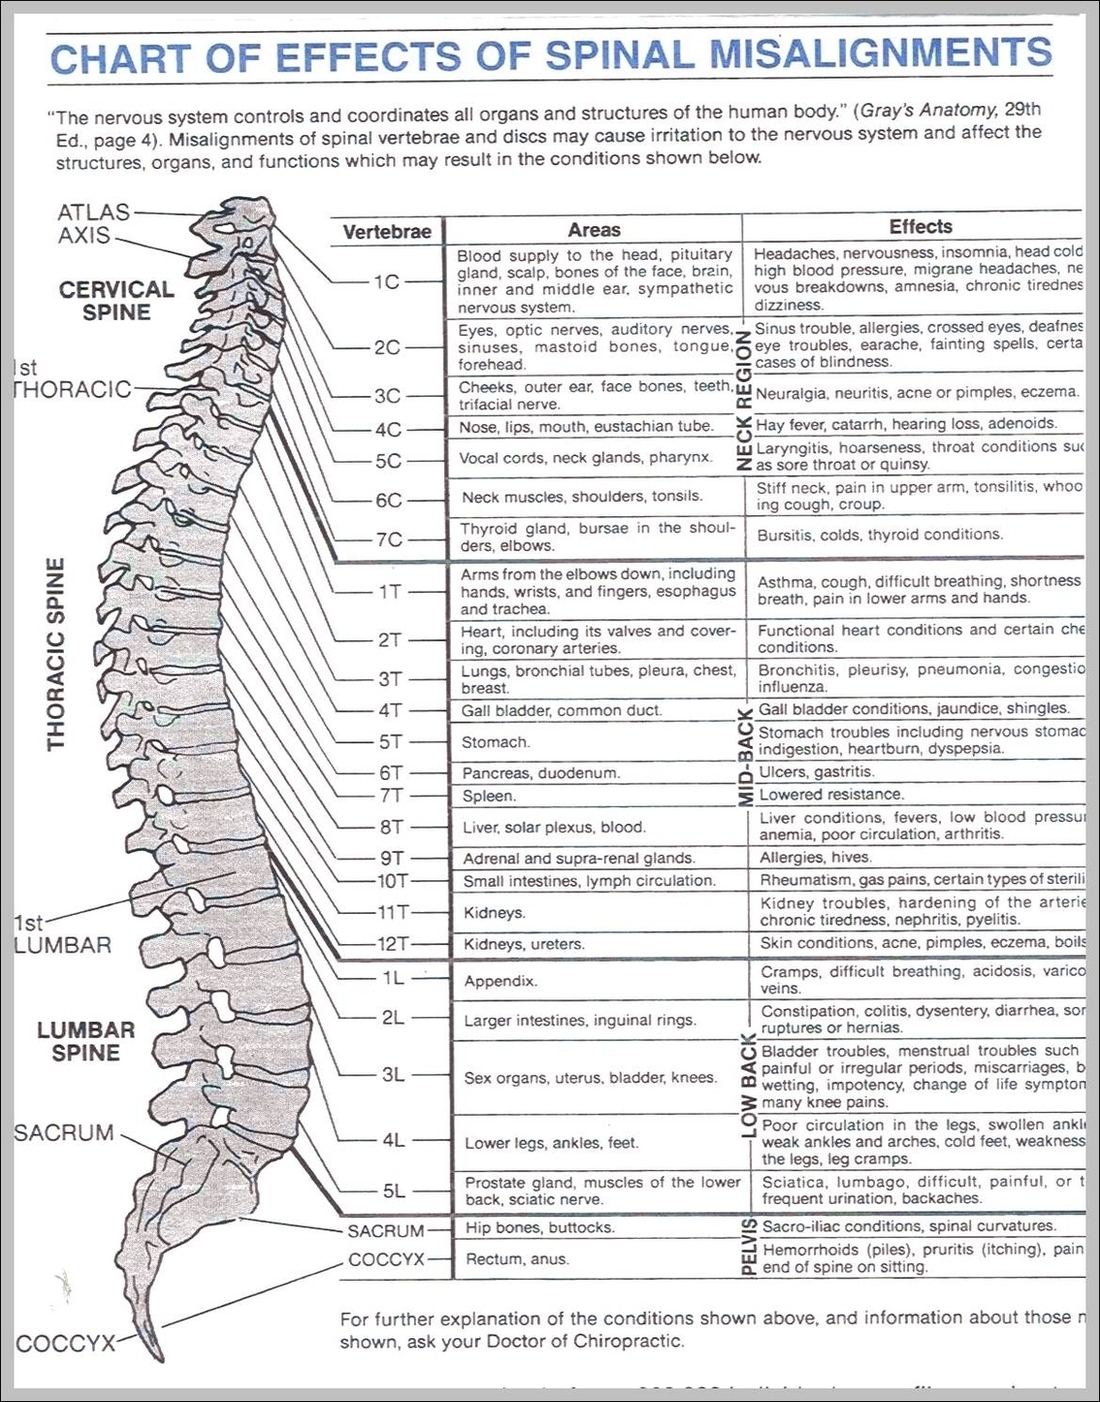 Picture Of A Spine Image